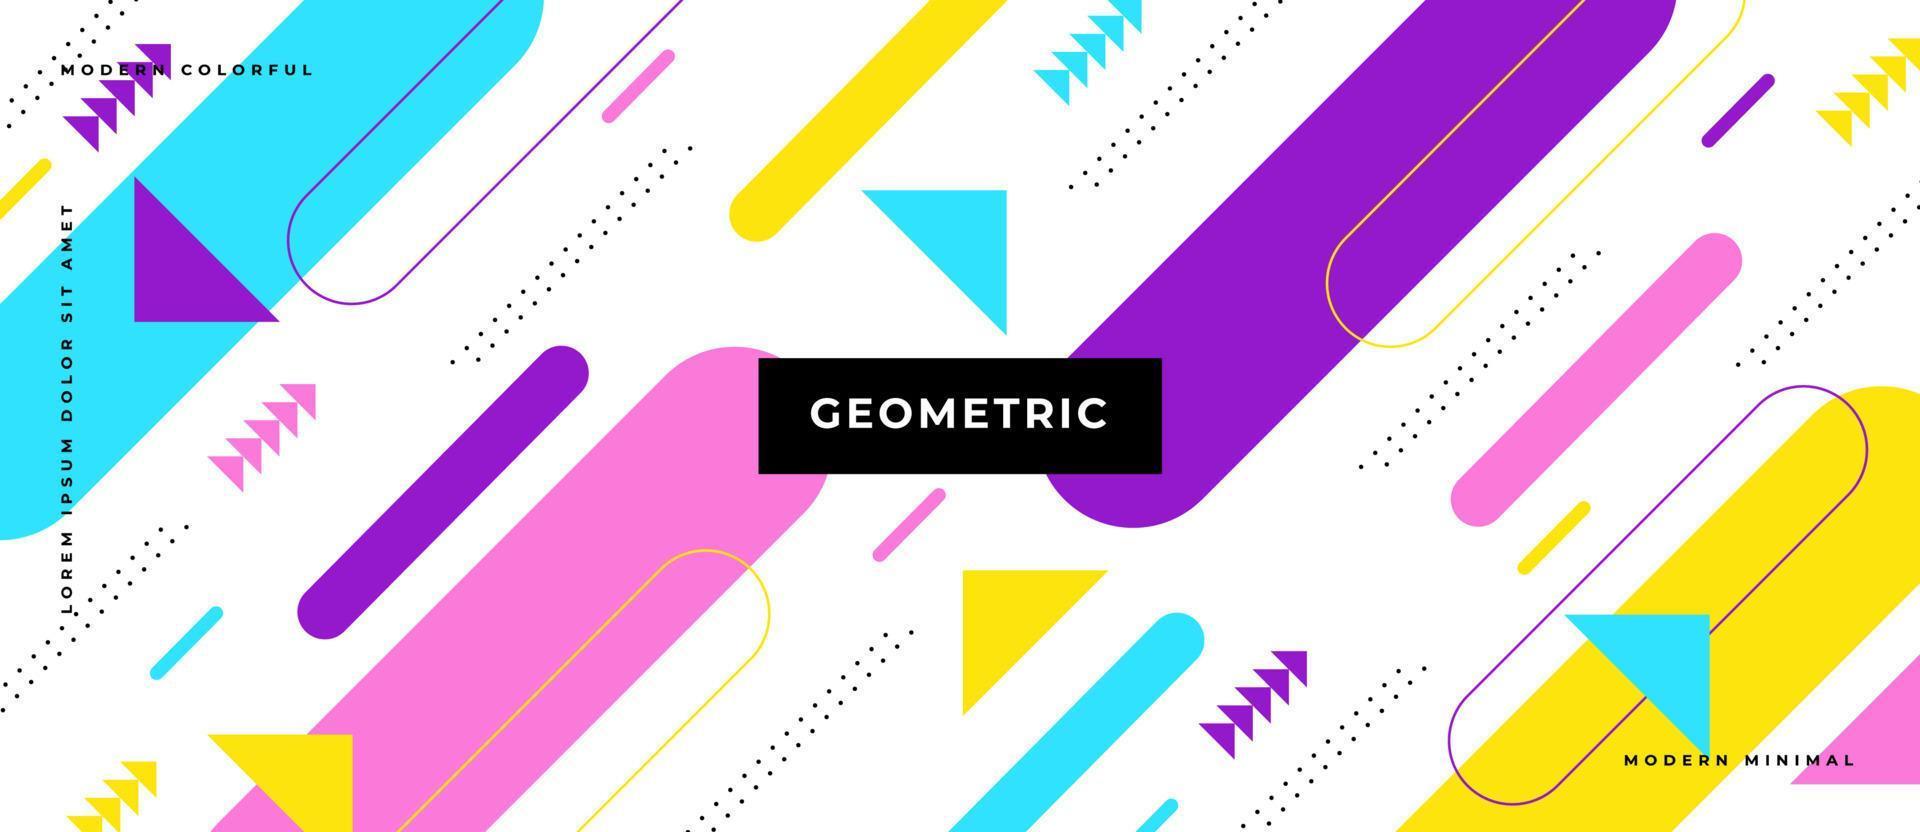 Colorful pattern moving memphis shape. Geometric background with flat shapes, element, line, dot in white plain background. vector